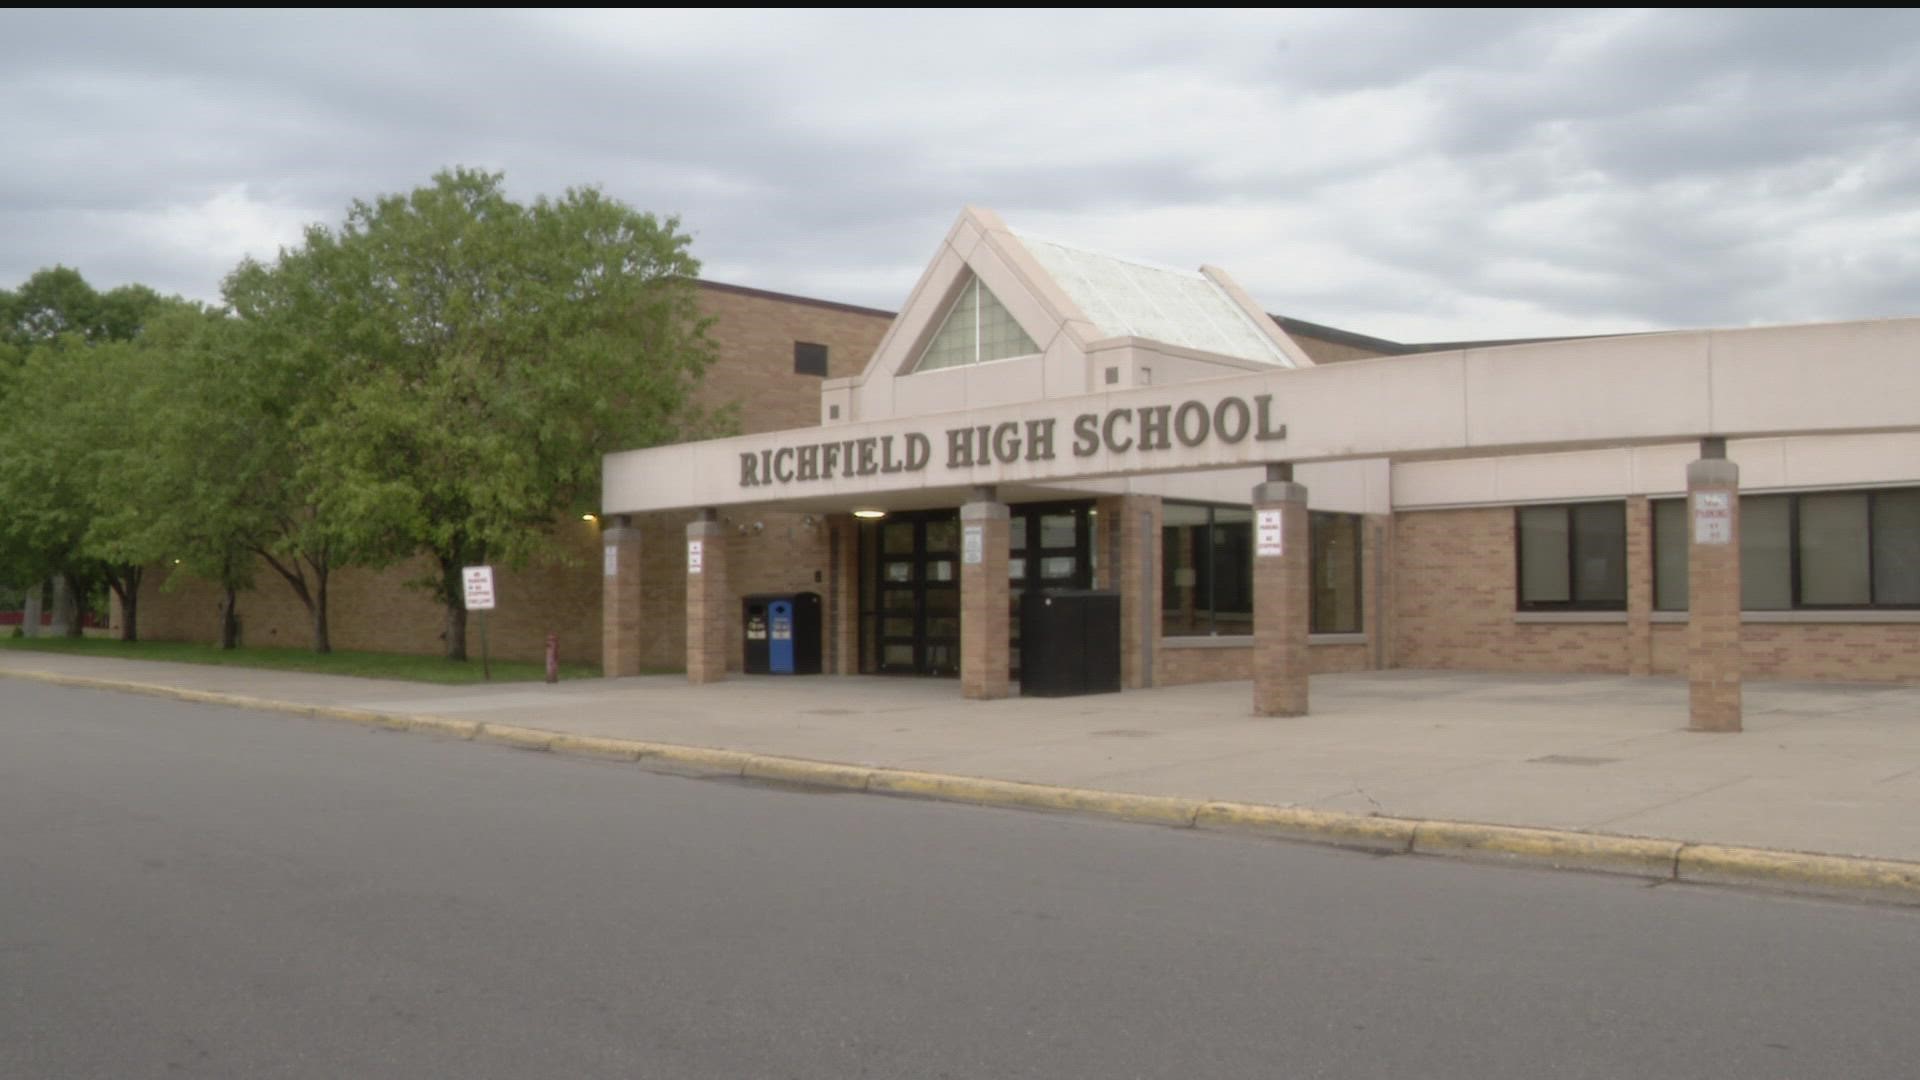 An online threat prompted school officials to cancel classes for 6-12 graders Monday.